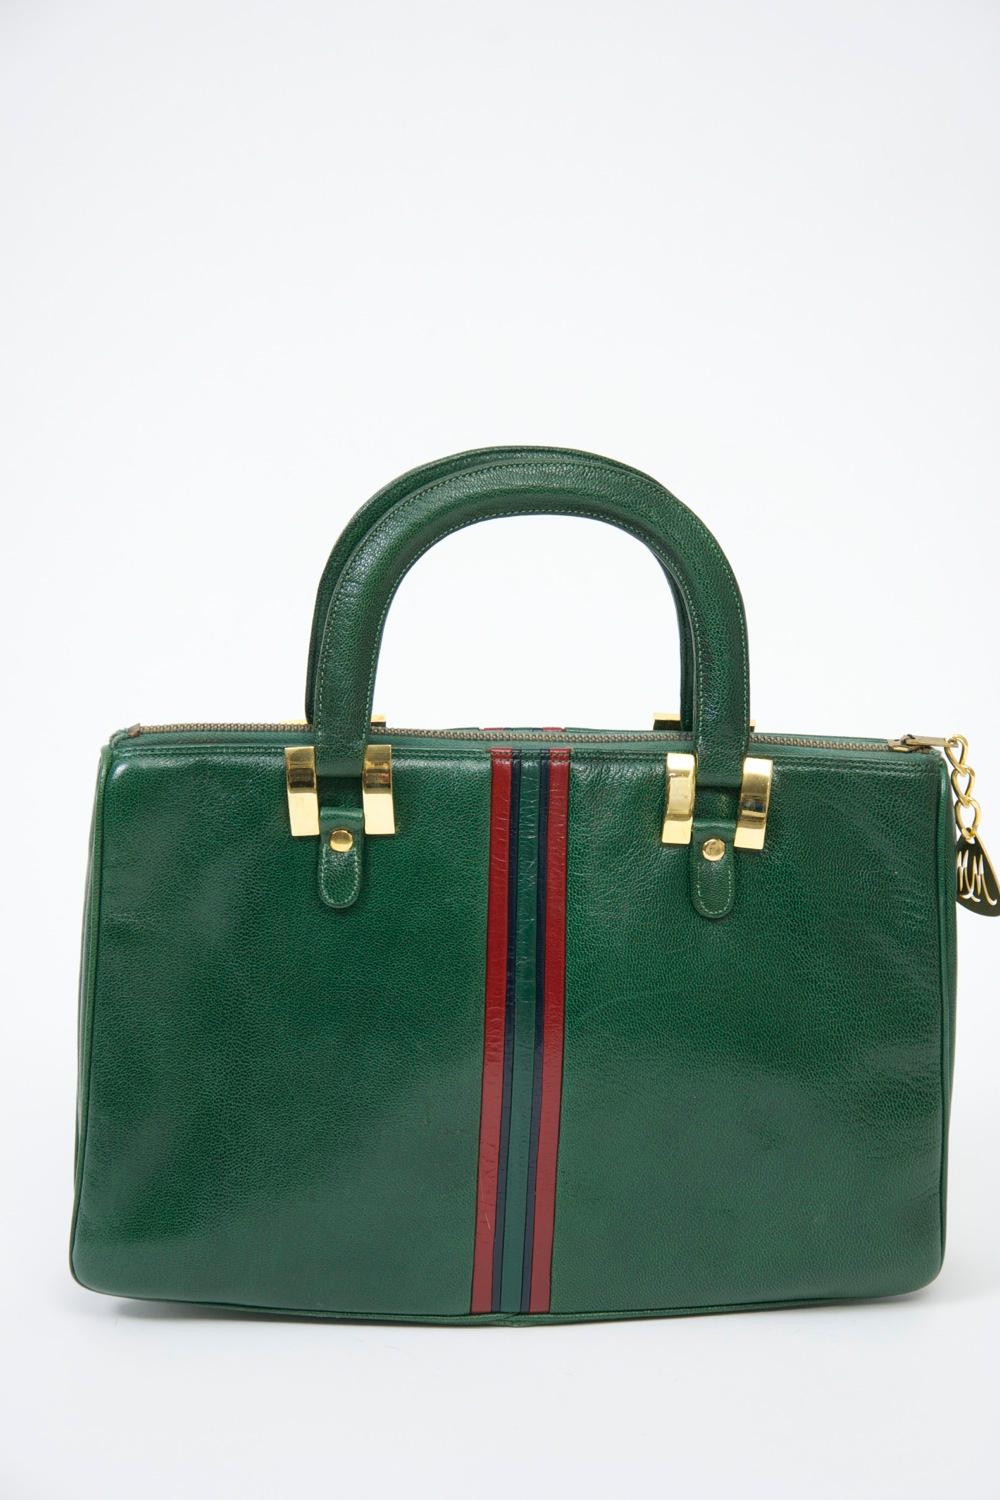 Morris Moskowitz Gucciesque double-handled bag in green leather with red and green vertical stripe down the middle. Zipper top with metal MM pull. White leather interior with zipper compartment.